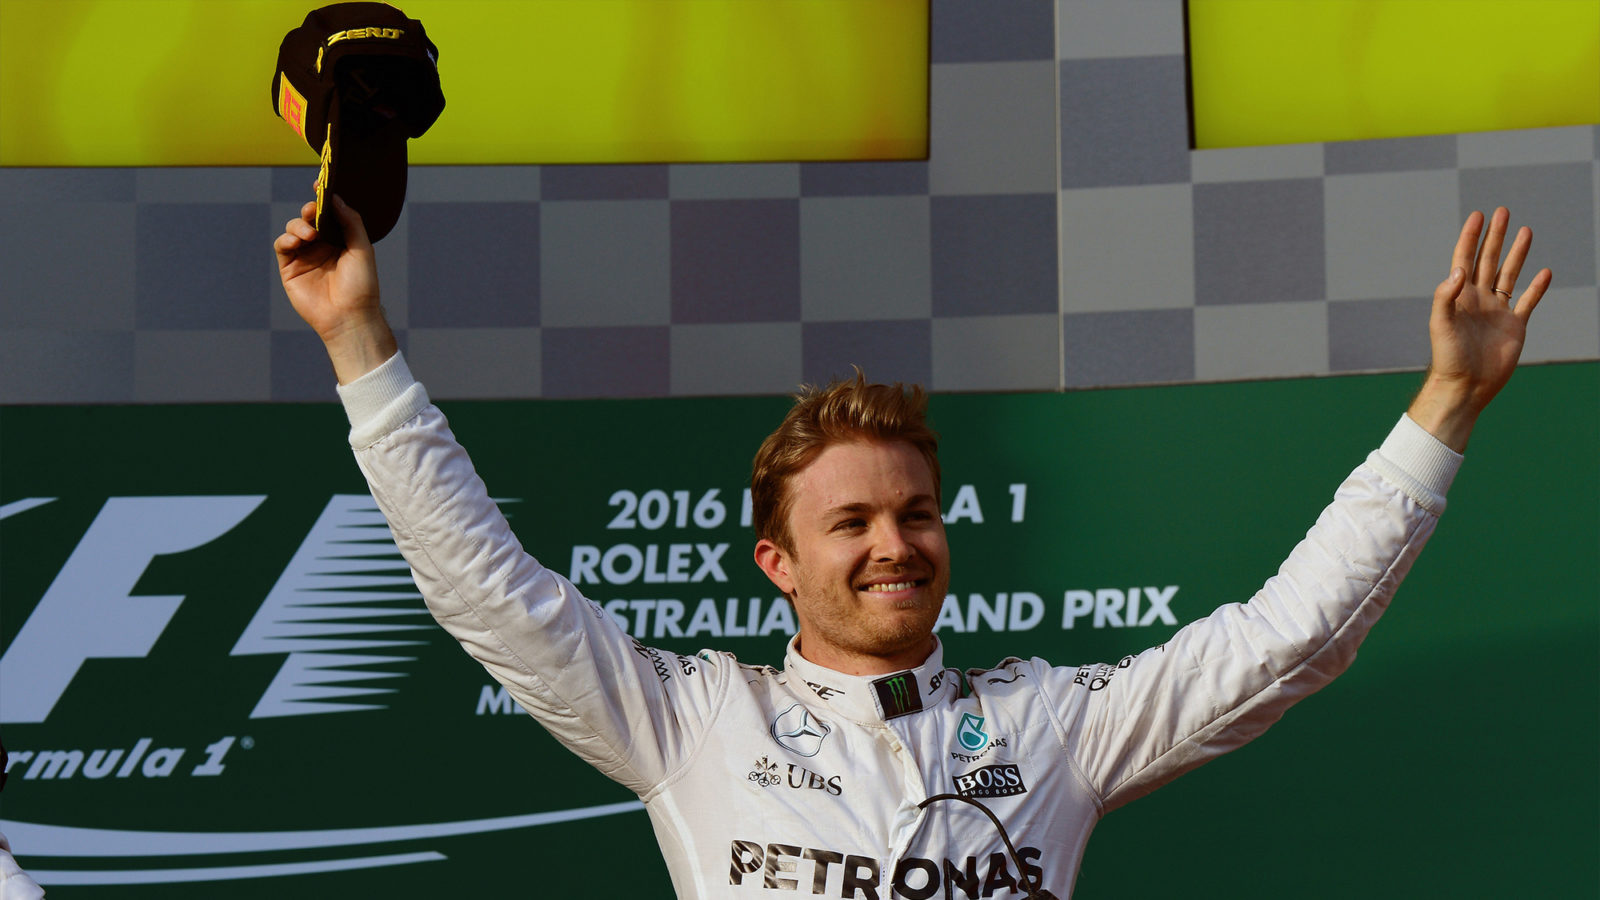 Nico Rosberg with arms raised on Melbourne podium after winning 2016 F1 Australian Grand Prix